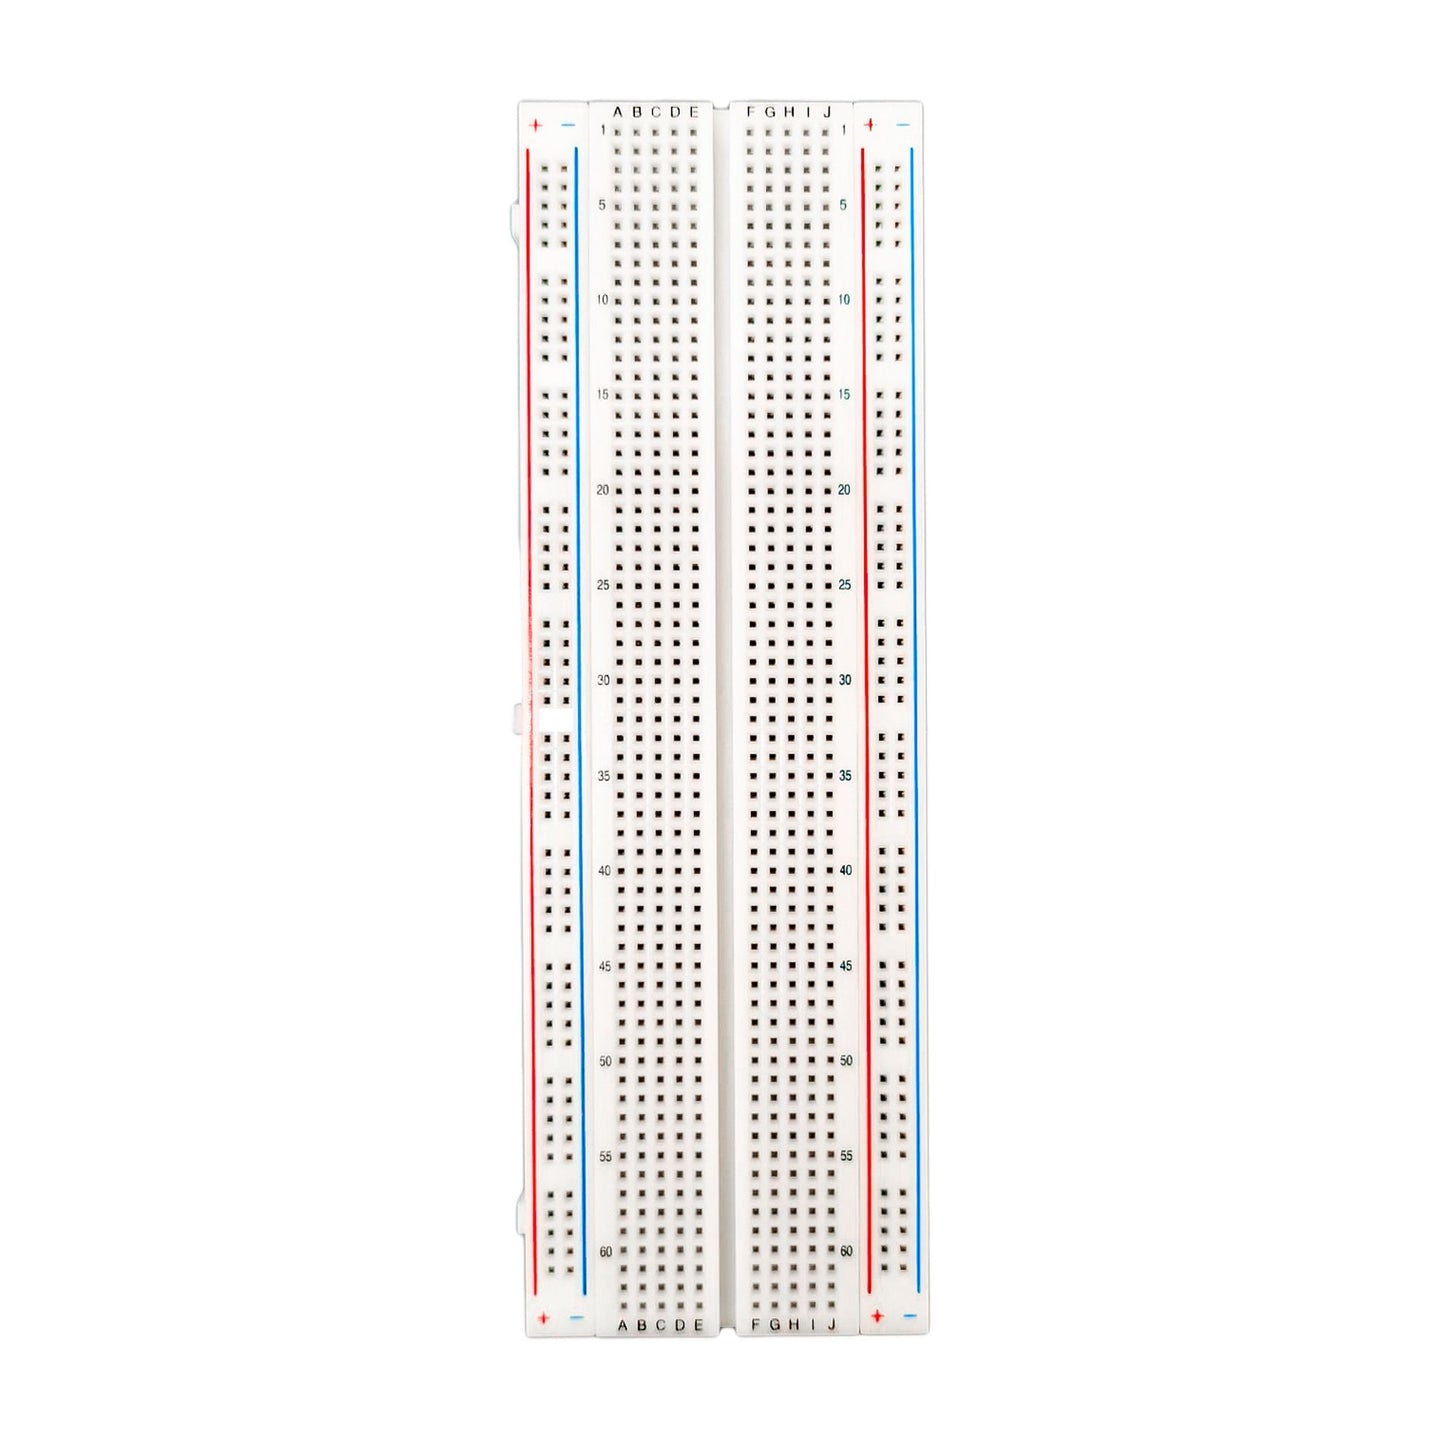 Elcart Solderless Breadboard with Adhesive Back, Prototype Board with 830 Silver Contacts, Building Block for Experimental Circuits